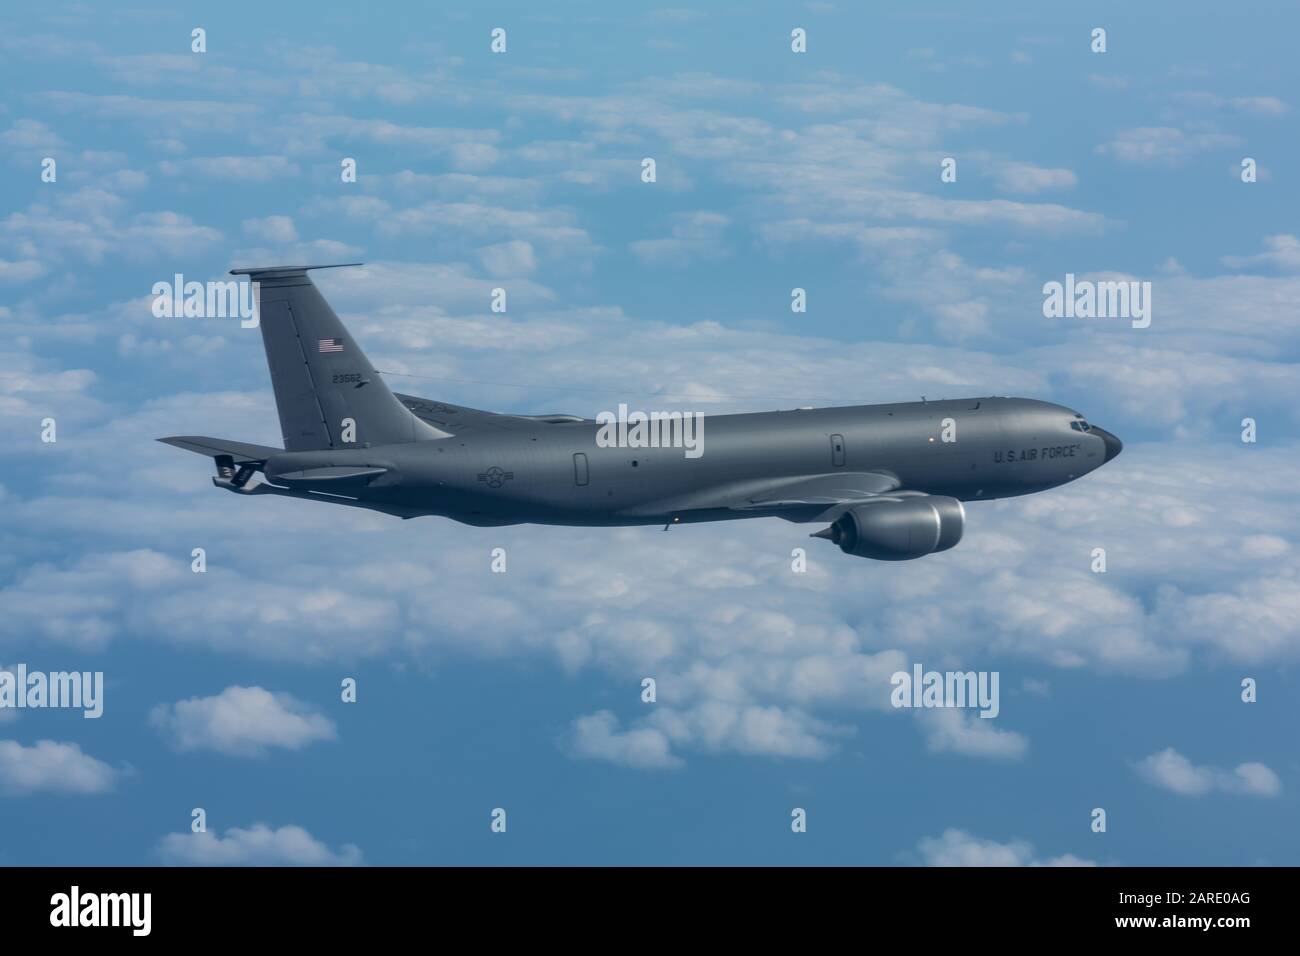 A KC-135 Stratotanker from the 909th Air Refueling Squadron flies during Exercise WestPac Rumrunner Jan. 10, 2020, out of Kadena Air Base, Japan. Units from the 18th Wing conduct exercises like WestPac Rumrunner to exercise, train and operate to sharpen lethality in an era of great power competition. (U.S. Air Force photo by Senior Airman Matthew Seefeldt) Stock Photo